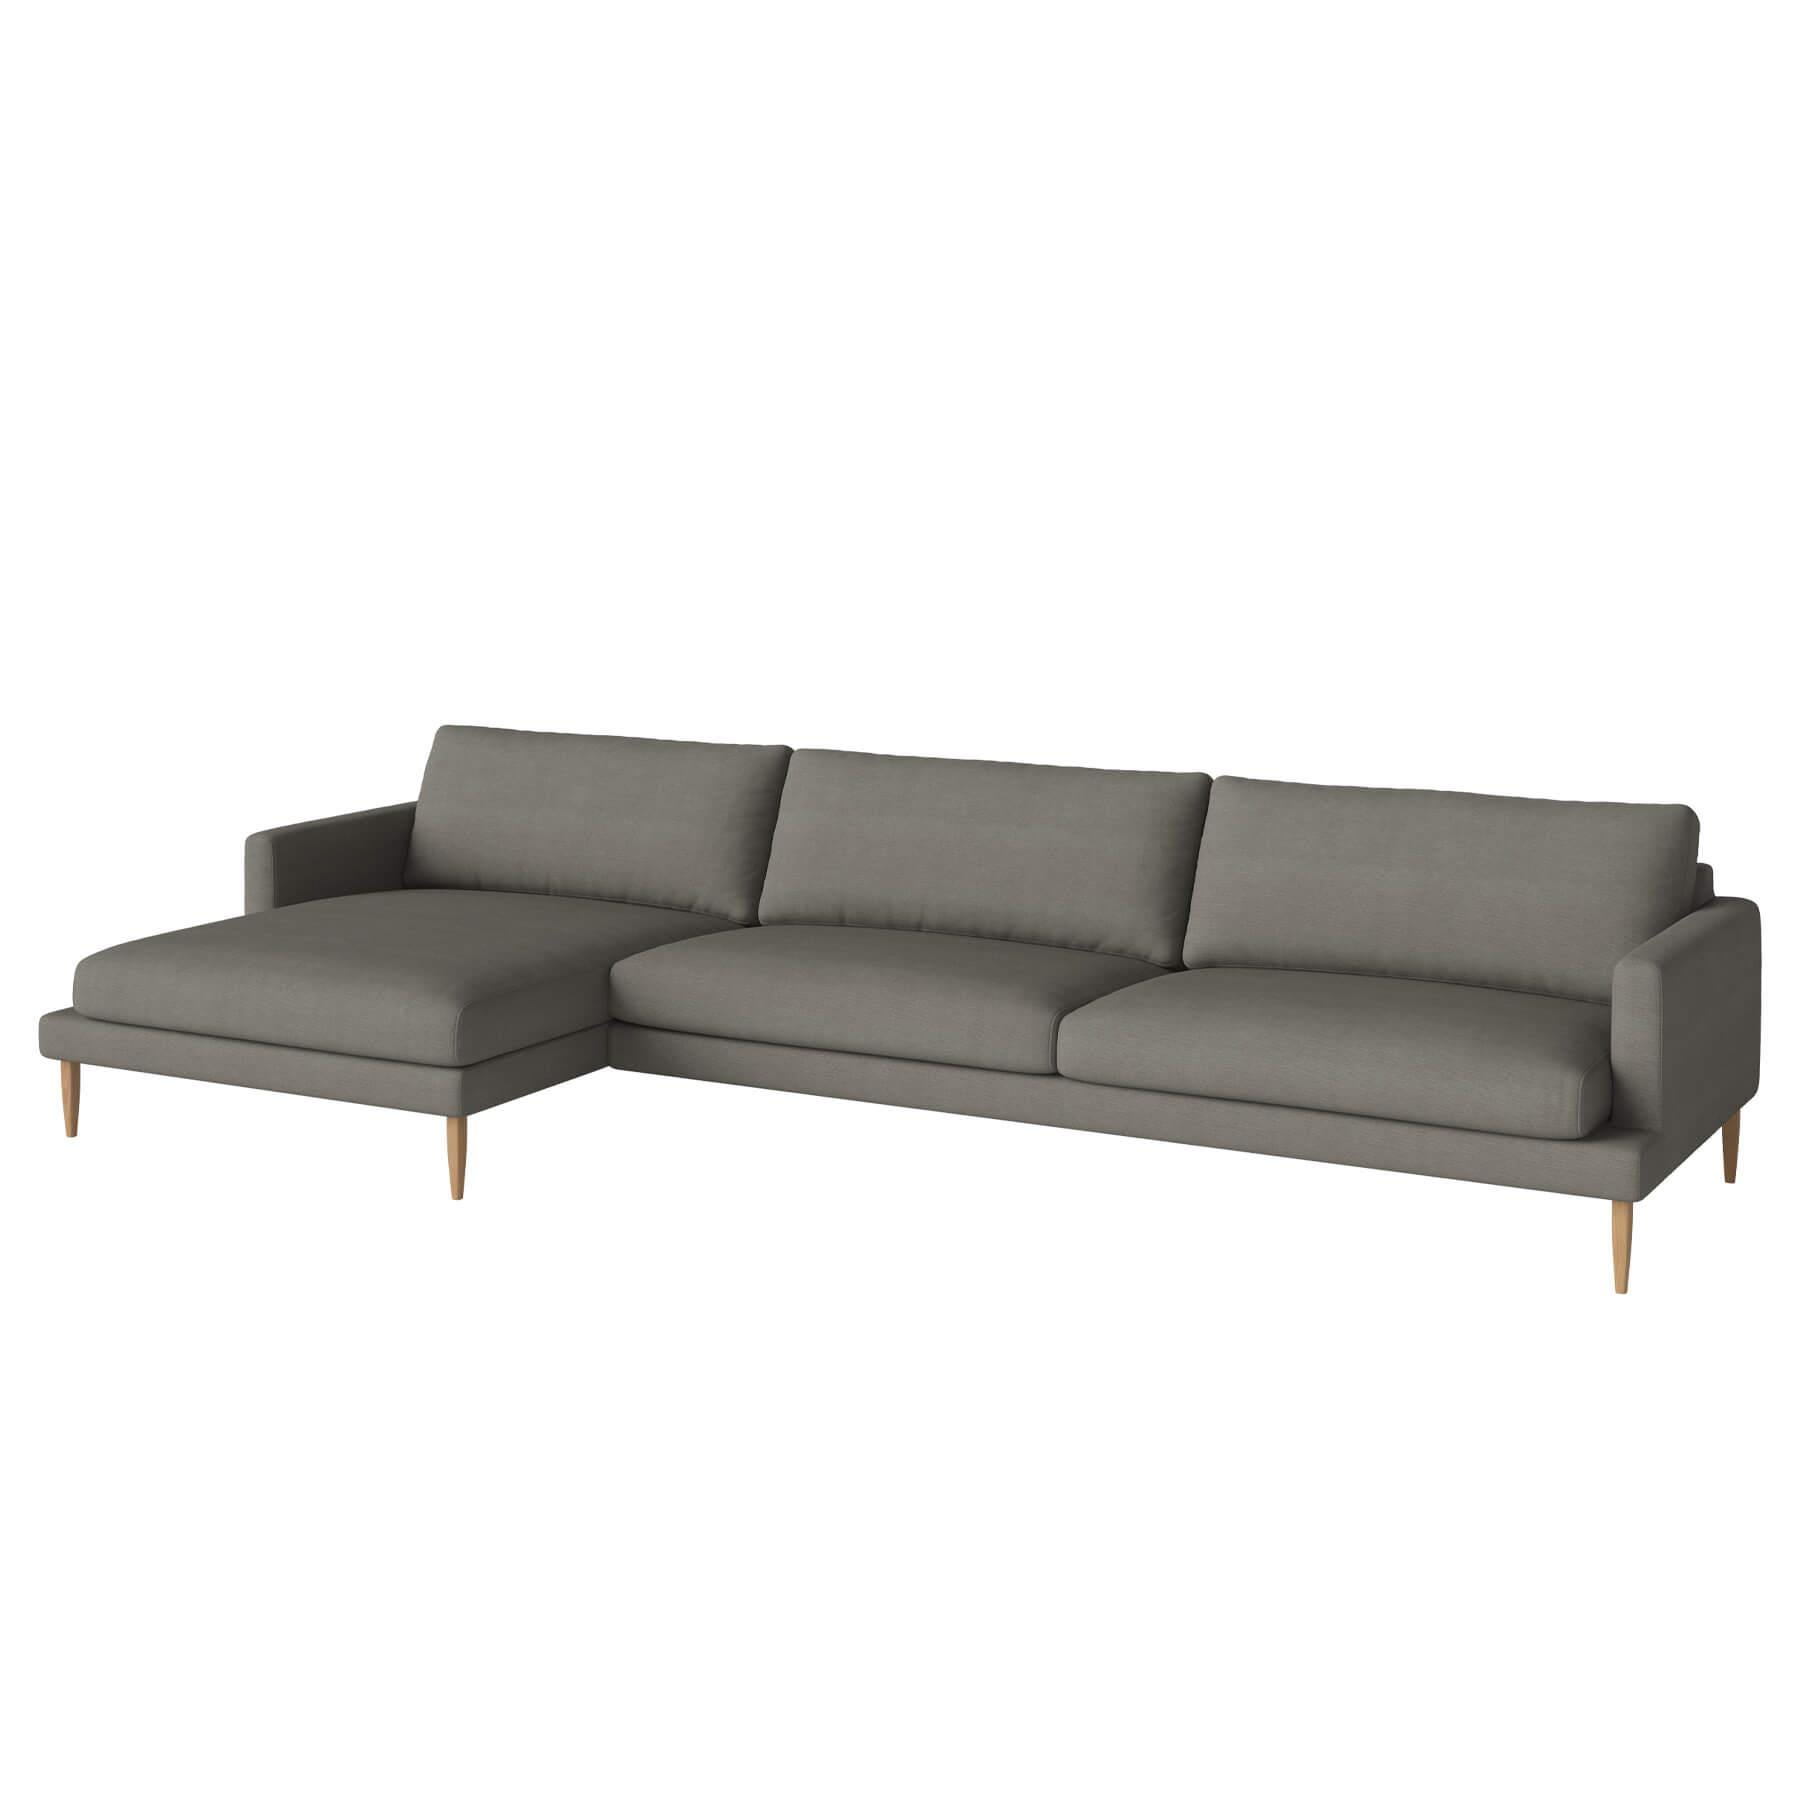 Bolia Veneda Sofa 45 Seater Sofa With Chaise Longue Oiled Oak Linea Grey Brown Left Brown Designer Furniture From Holloways Of Ludlow